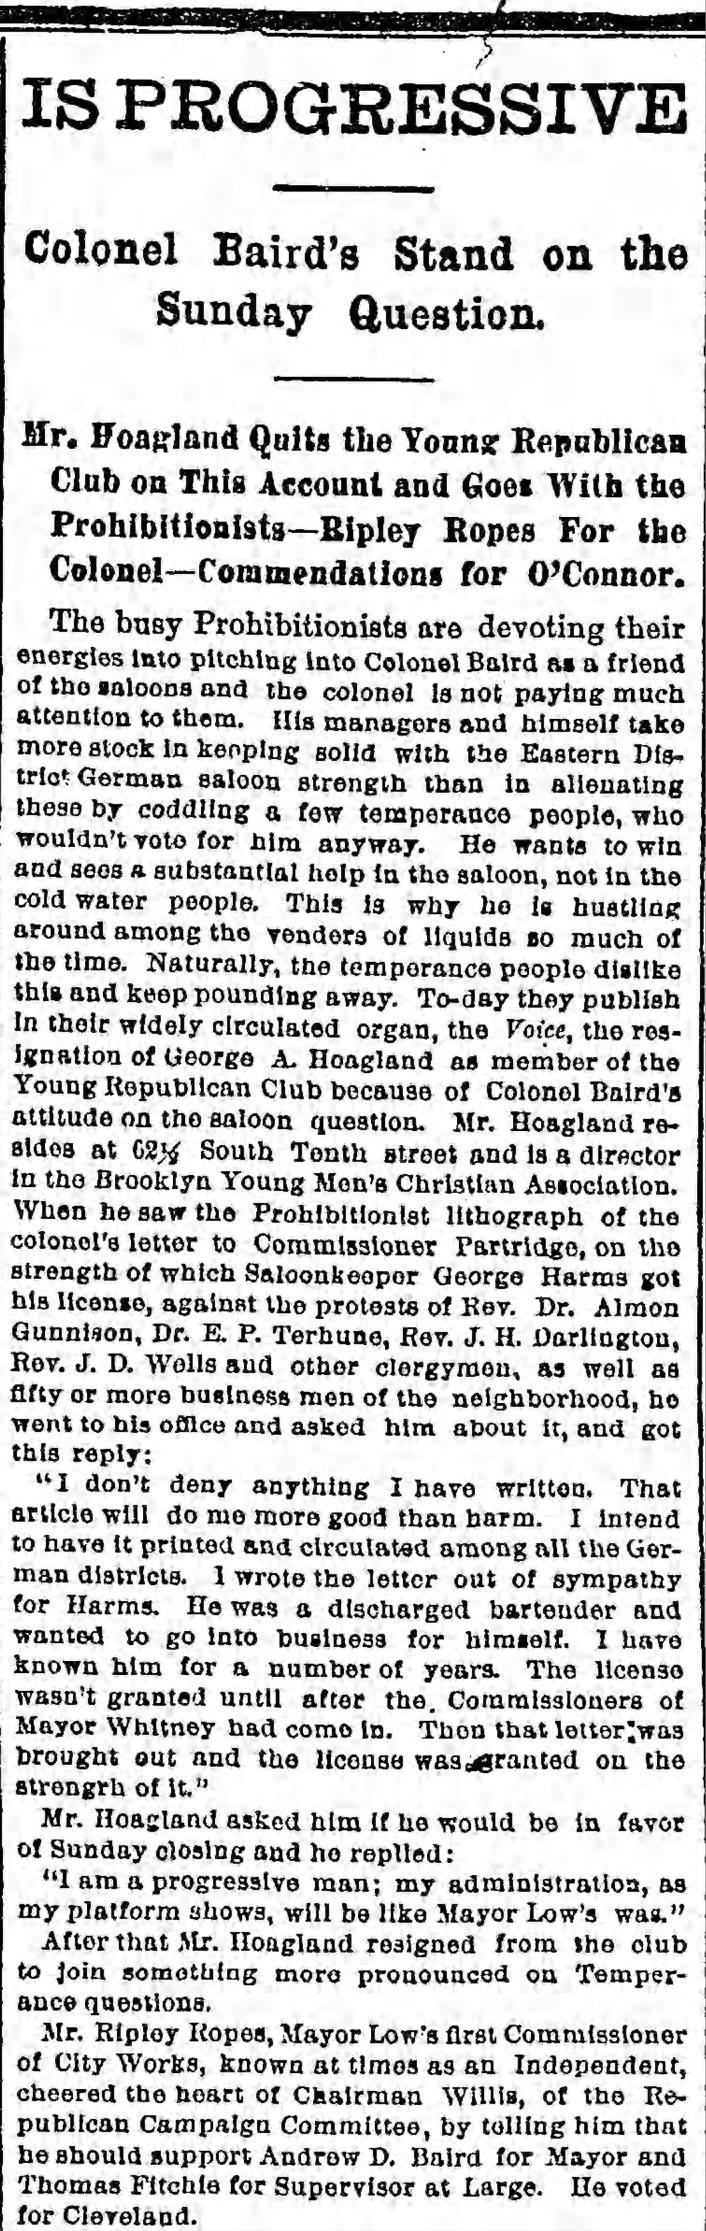 My original American ancestor (27 October 1887) made the news as a boogey-man in a political attack by the Temperance league on Colonel Andrew D. Baird.